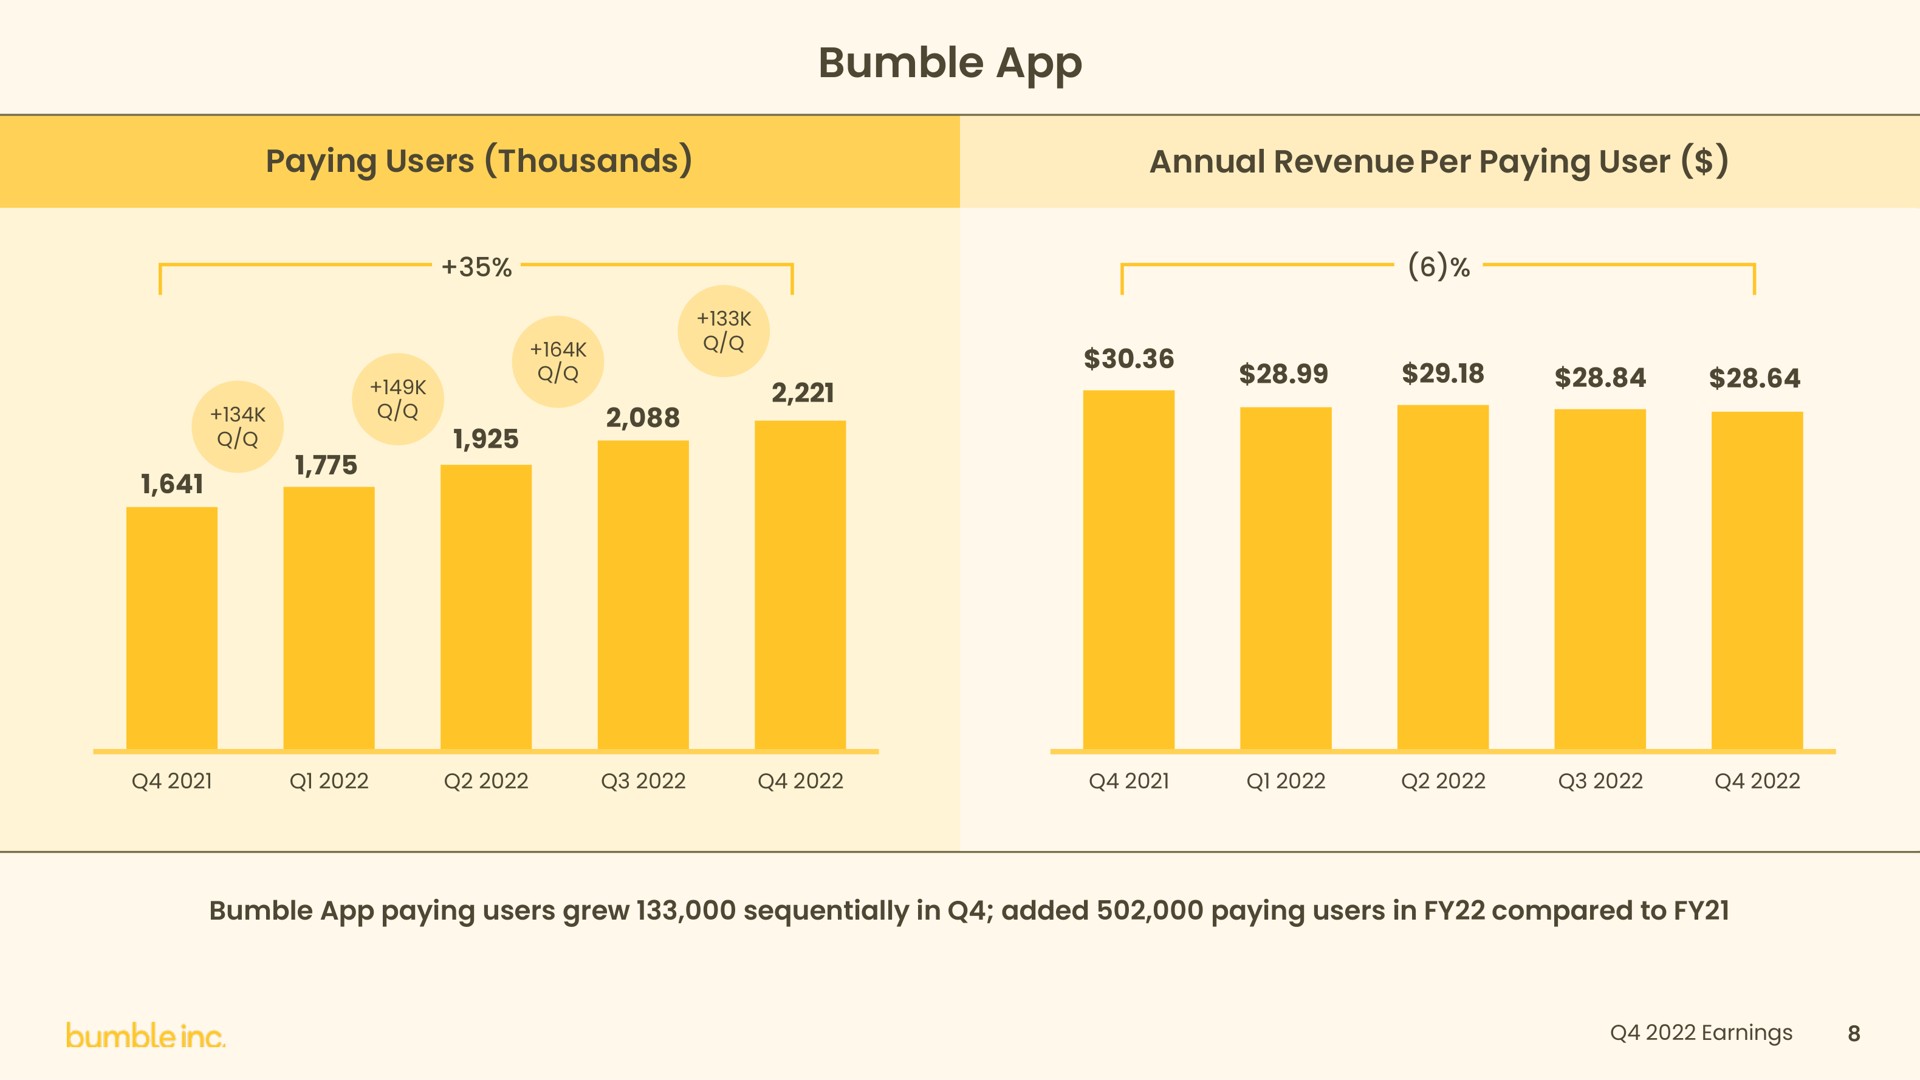 bumble annual revenue per paying user | Bumble